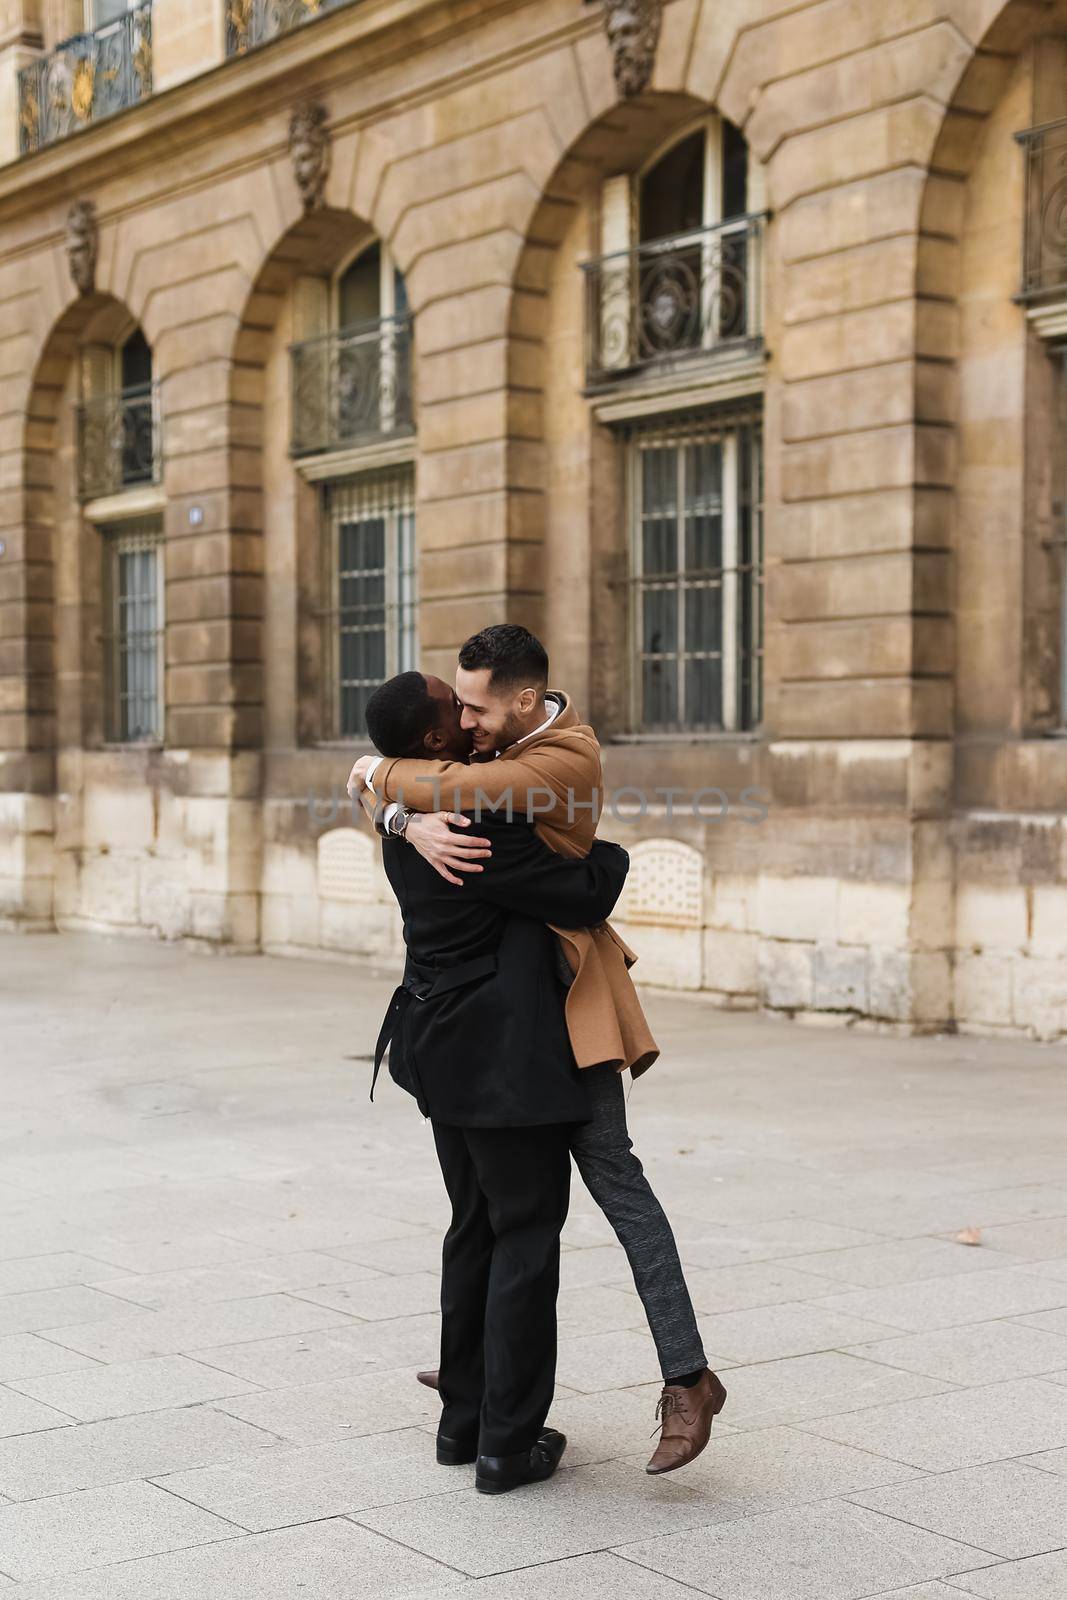 Caucasian smiling man in suit walking with afroamerican male lgbt gay and hugging in Paris France. by sisterspro